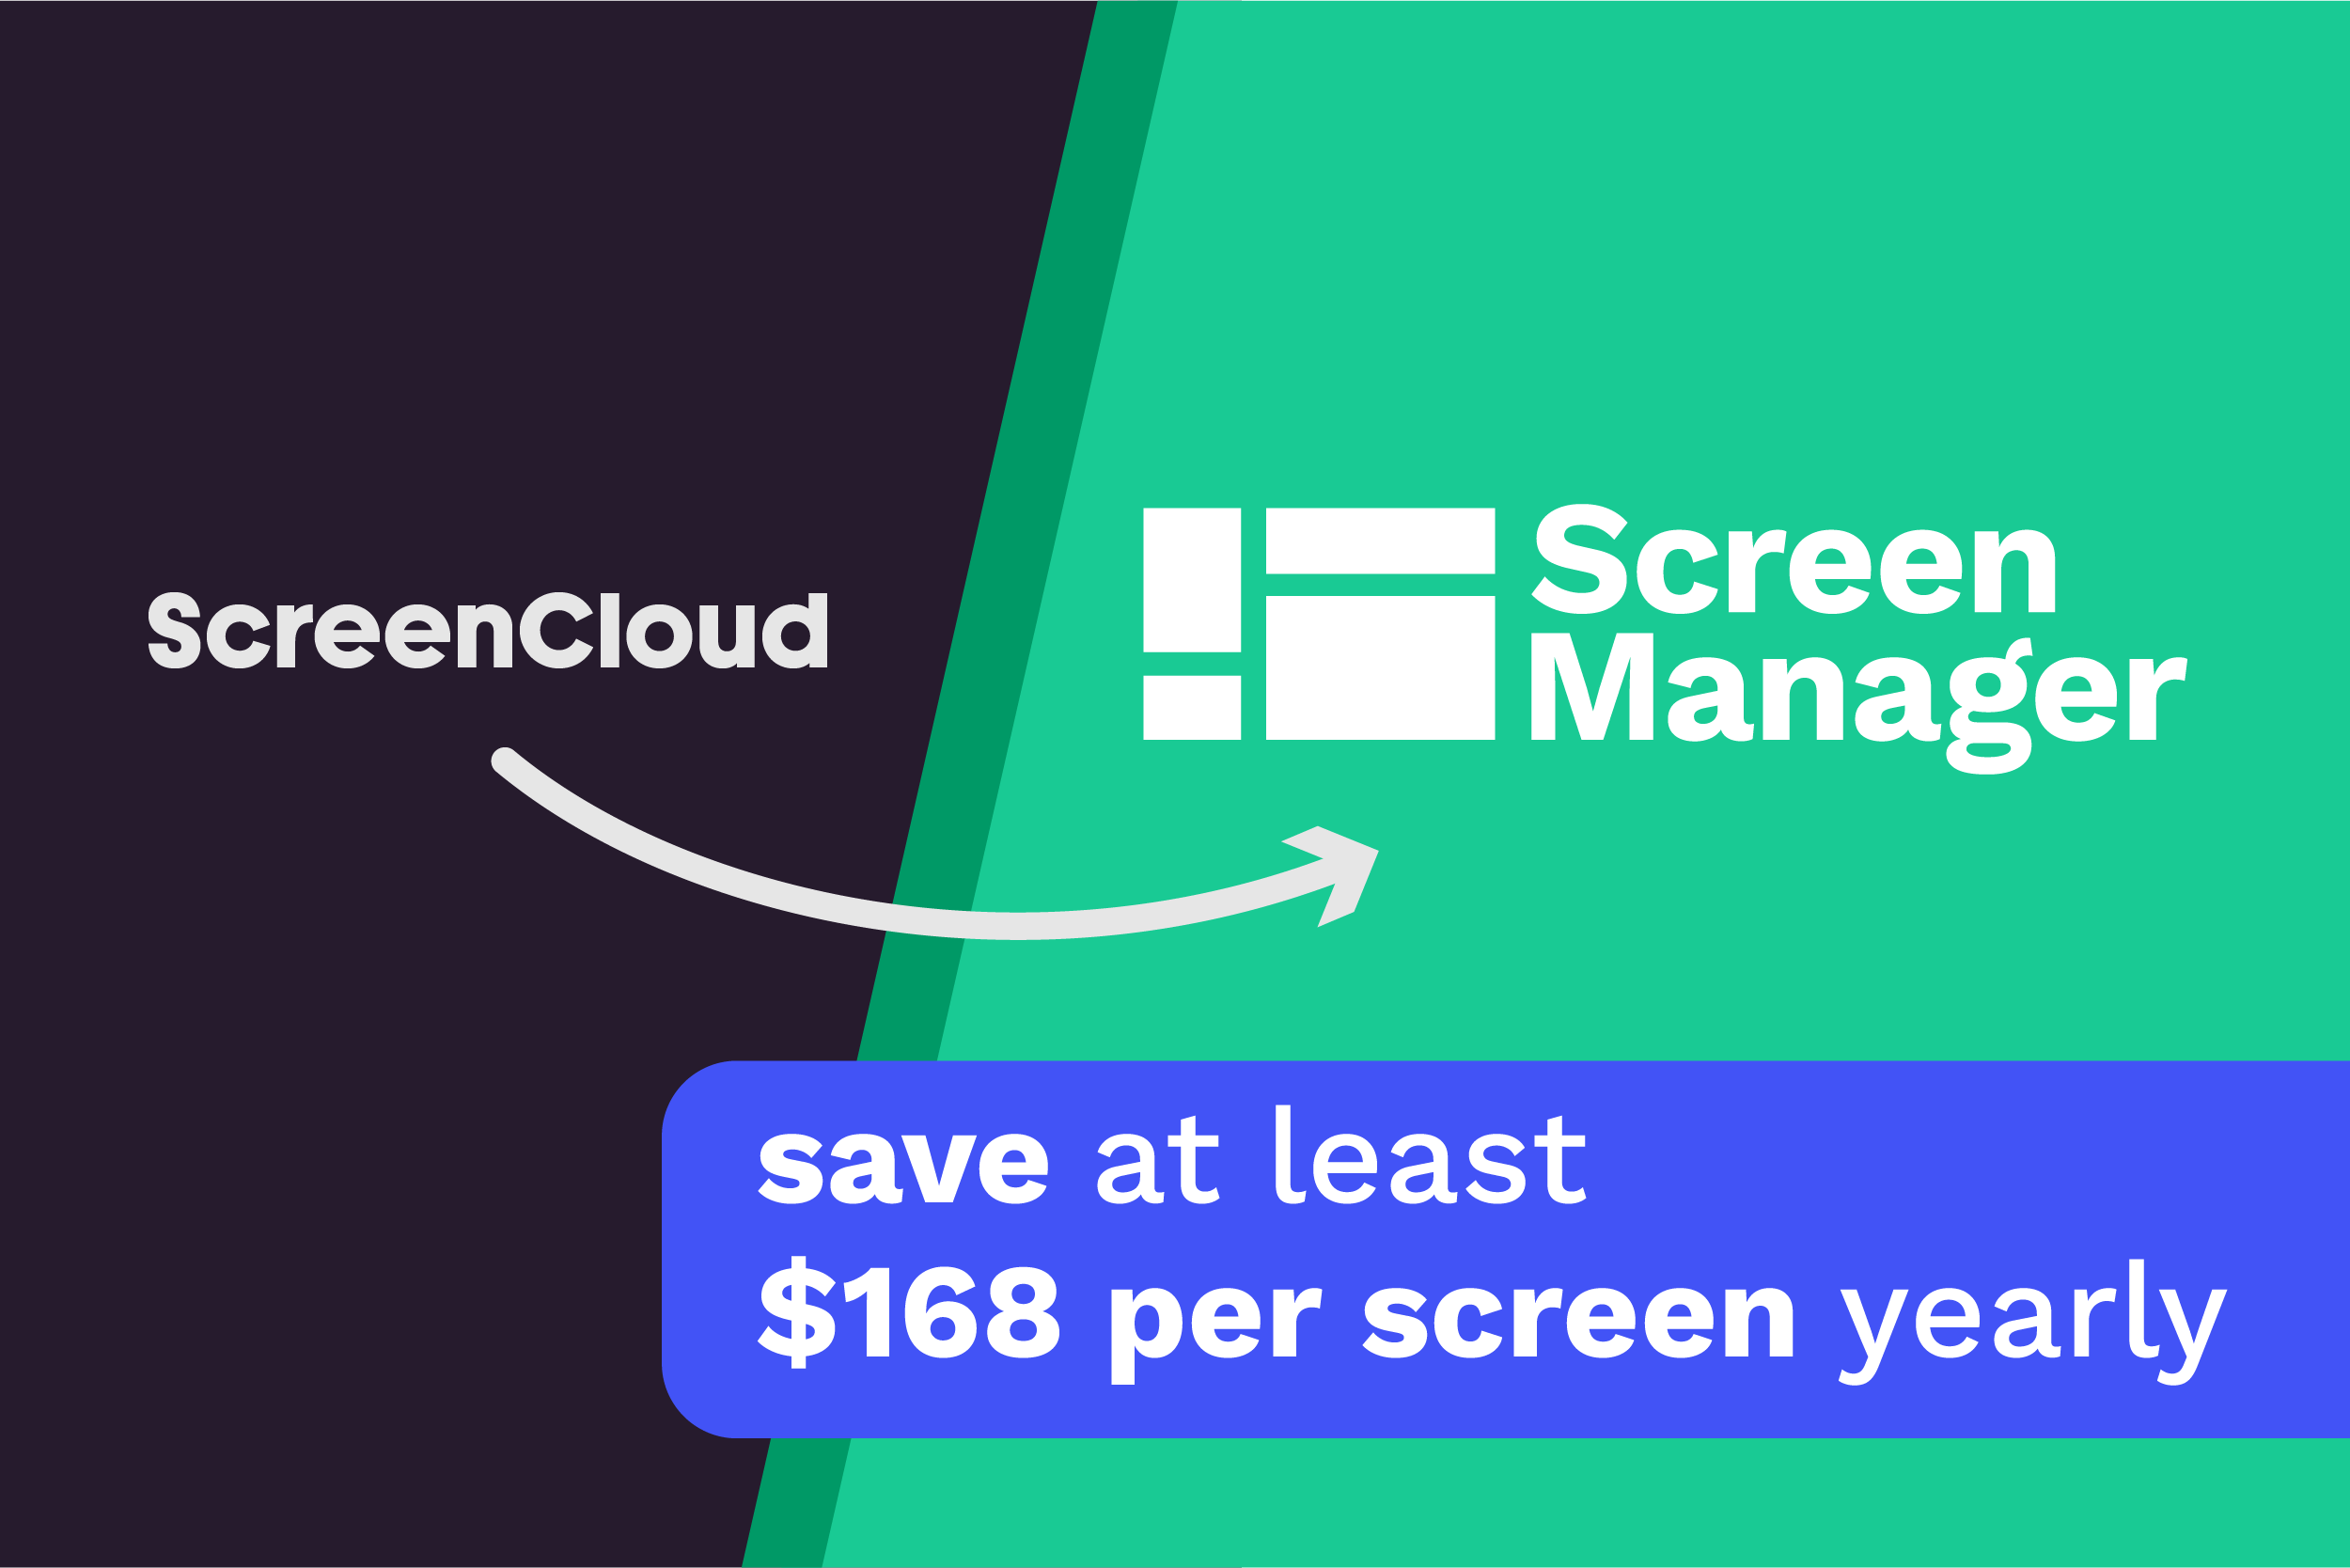 switch from screen cloud to screen manager today